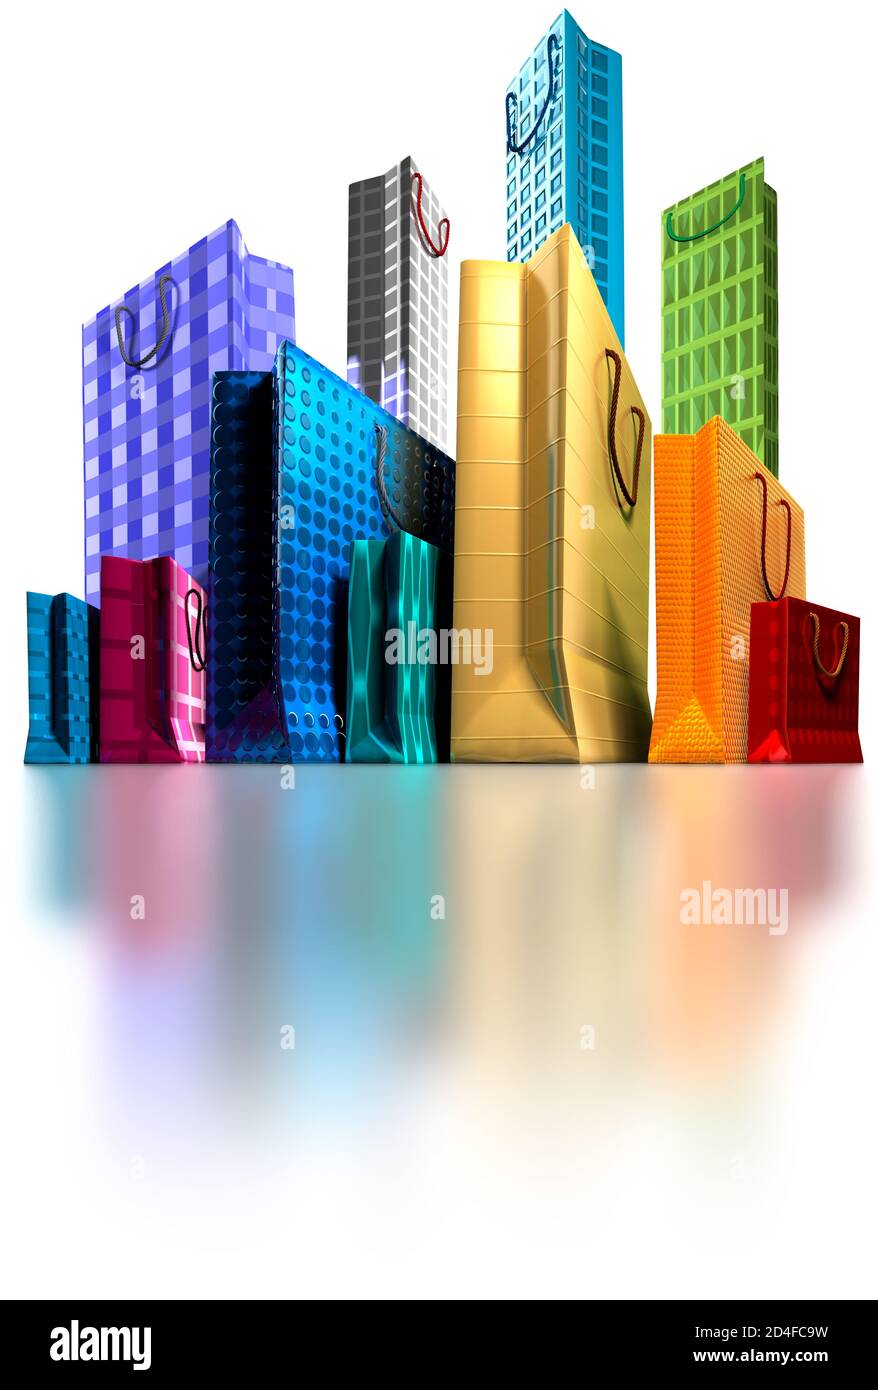 Shopping, retail therapy, consumerism, carrier bags, mall, skyline Stock Photo